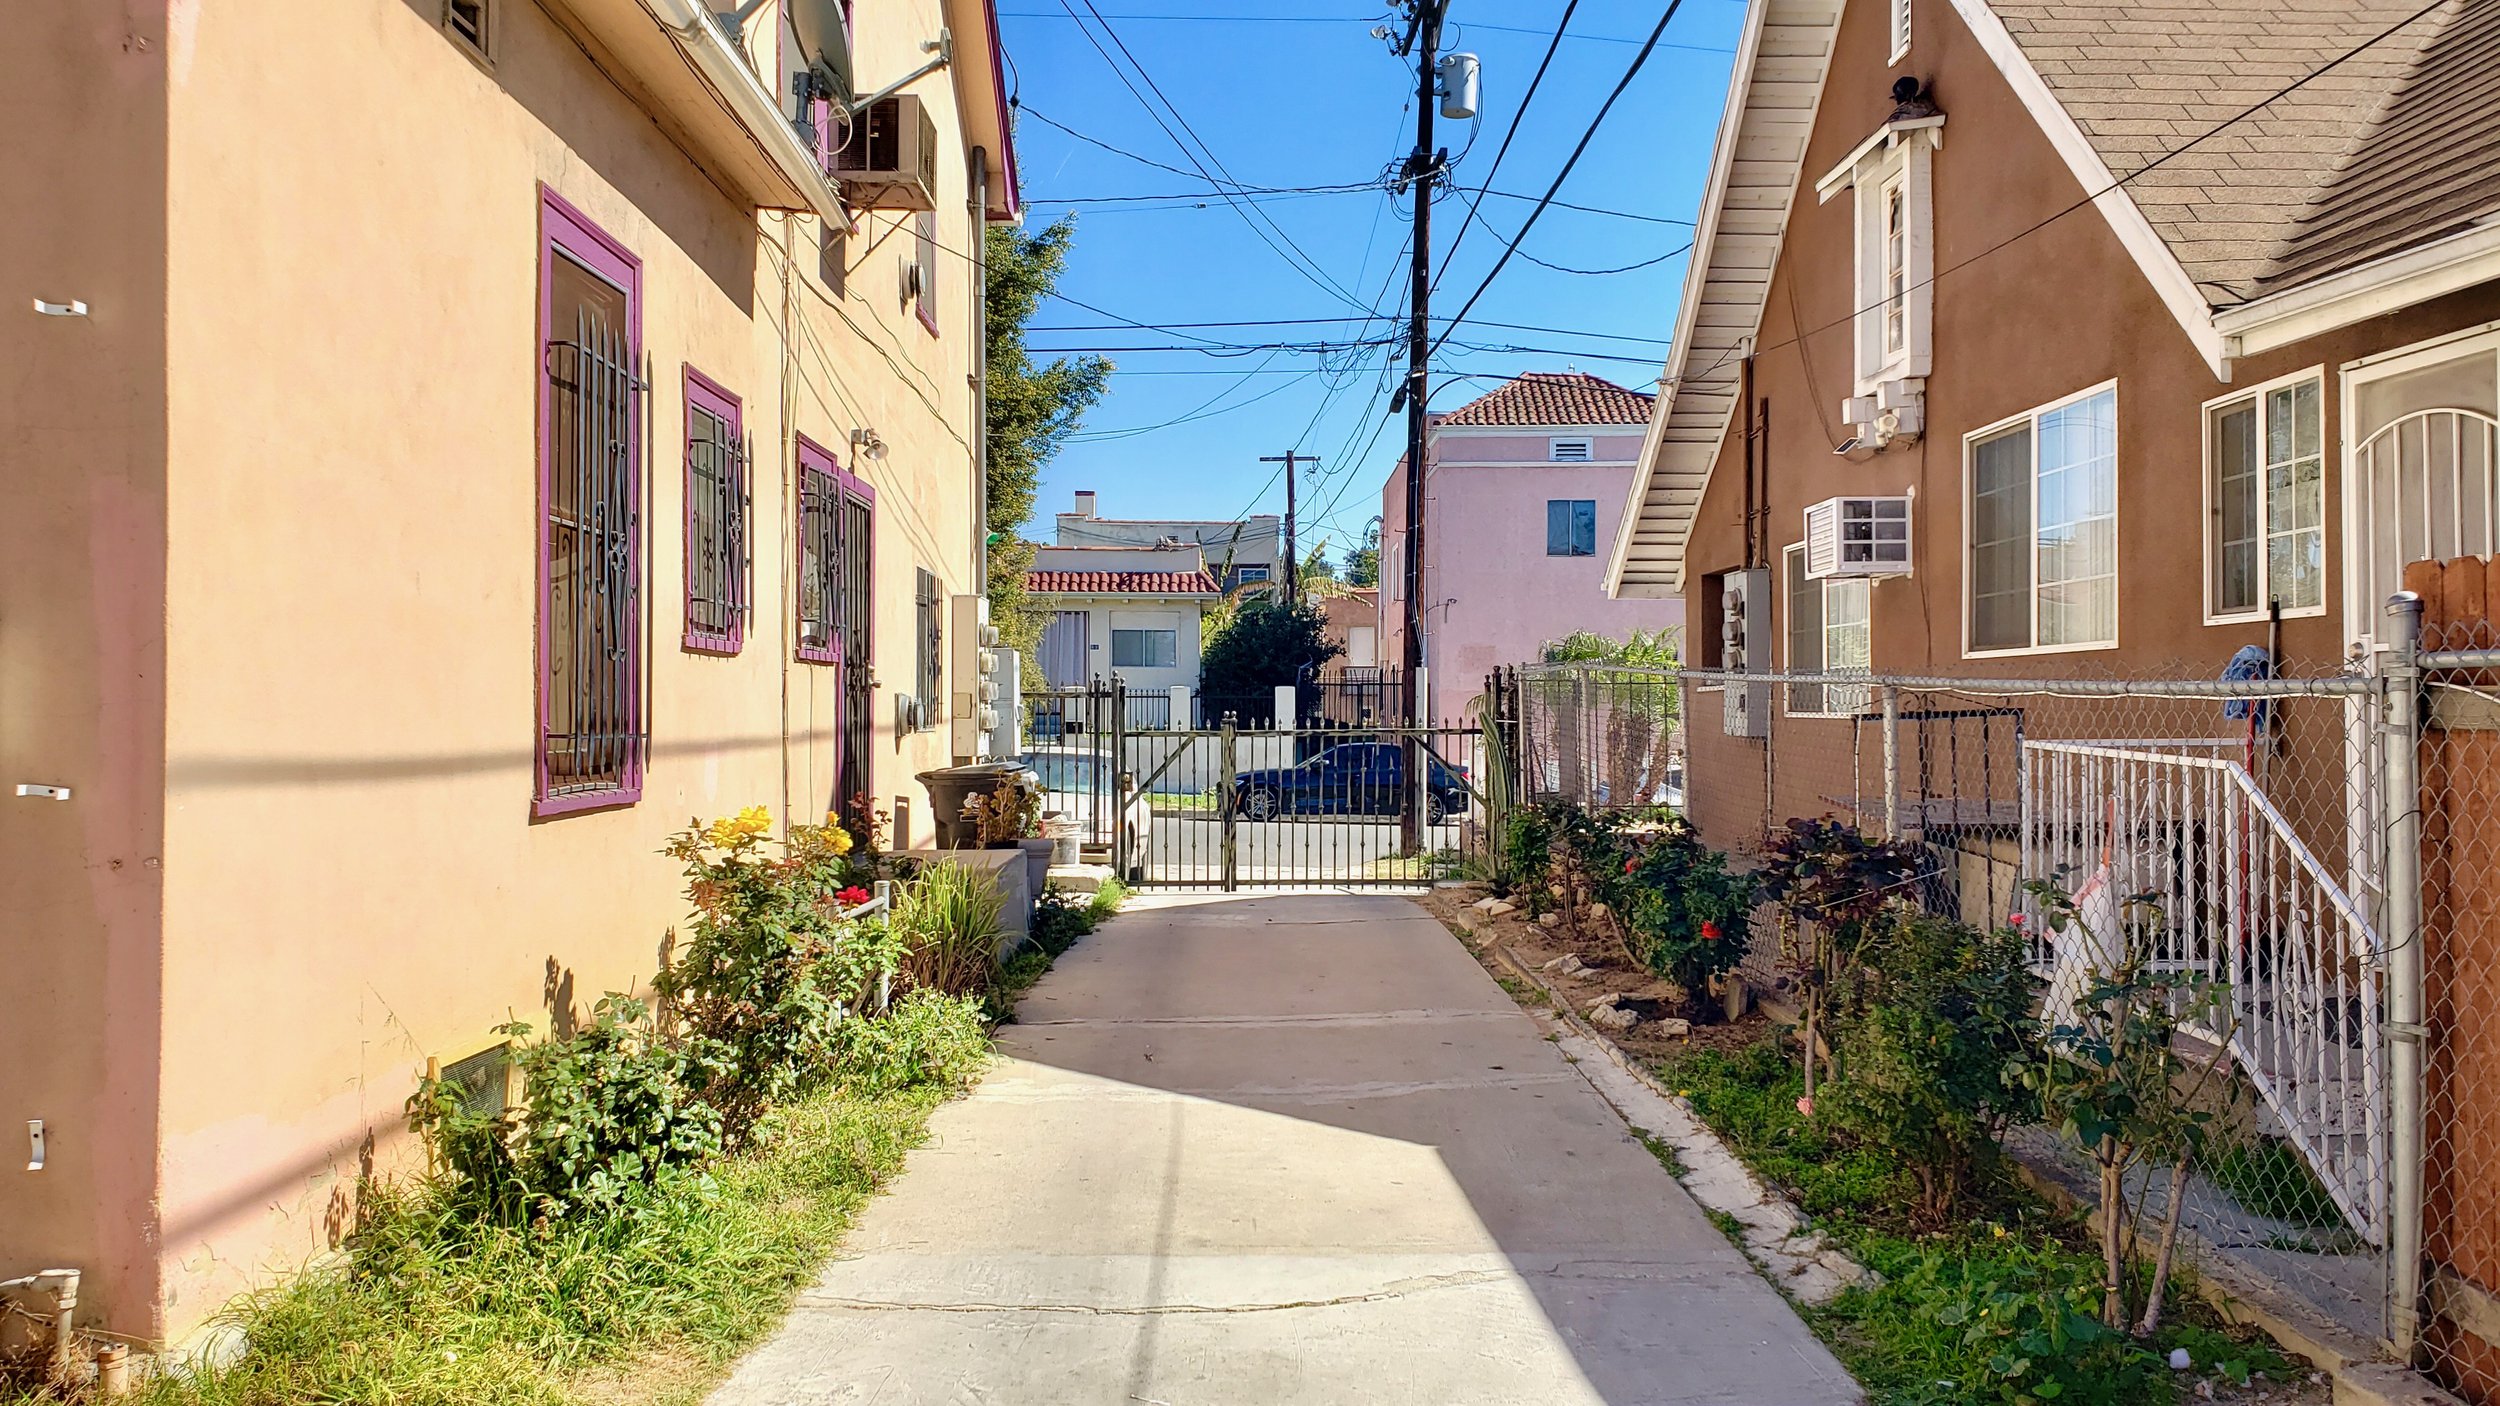 A residential alley with a pink apartment, gated path, and flower beds under a clear sky.